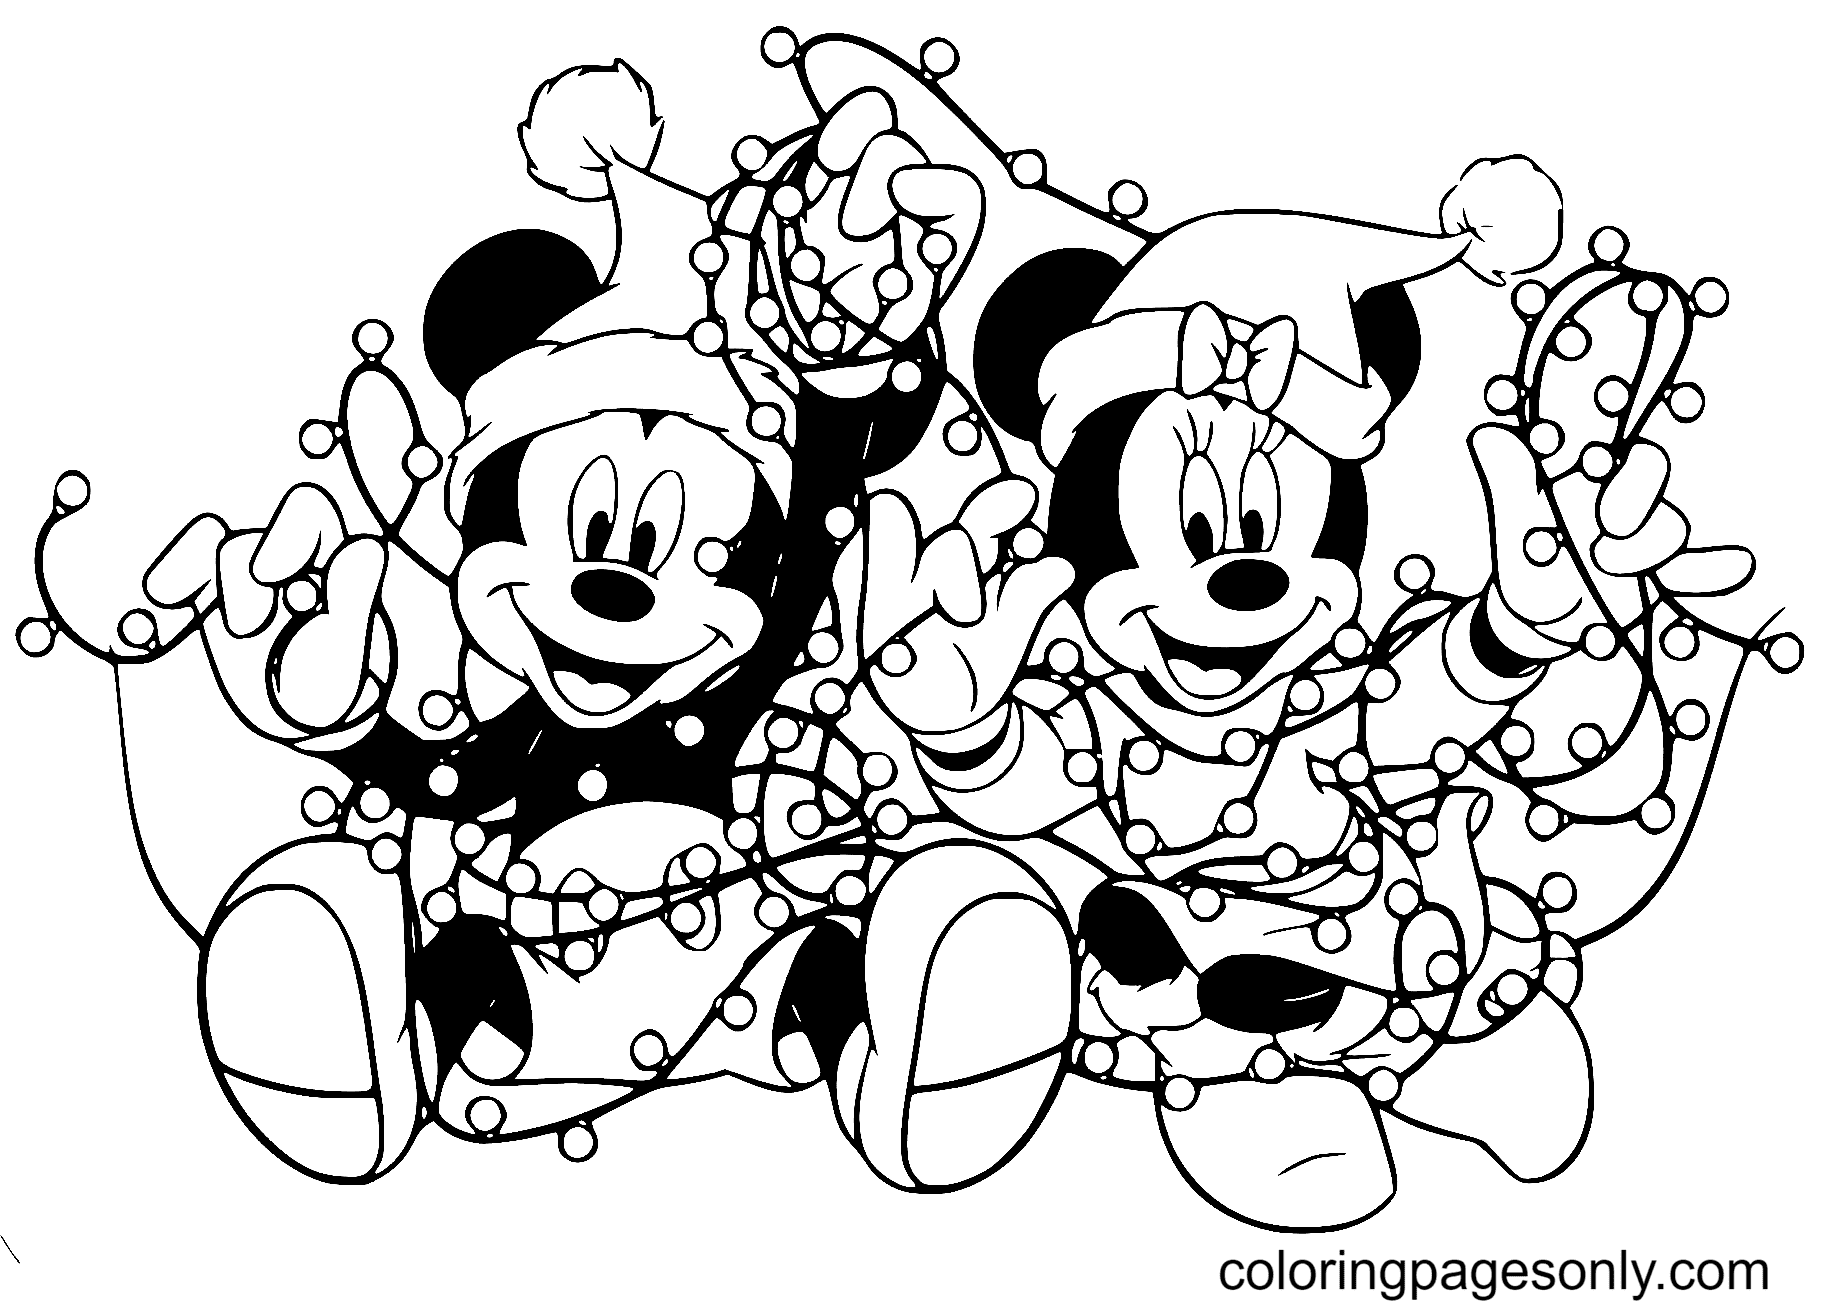 Mickey Minnie Tangled In Christmas Lights Coloring Pages